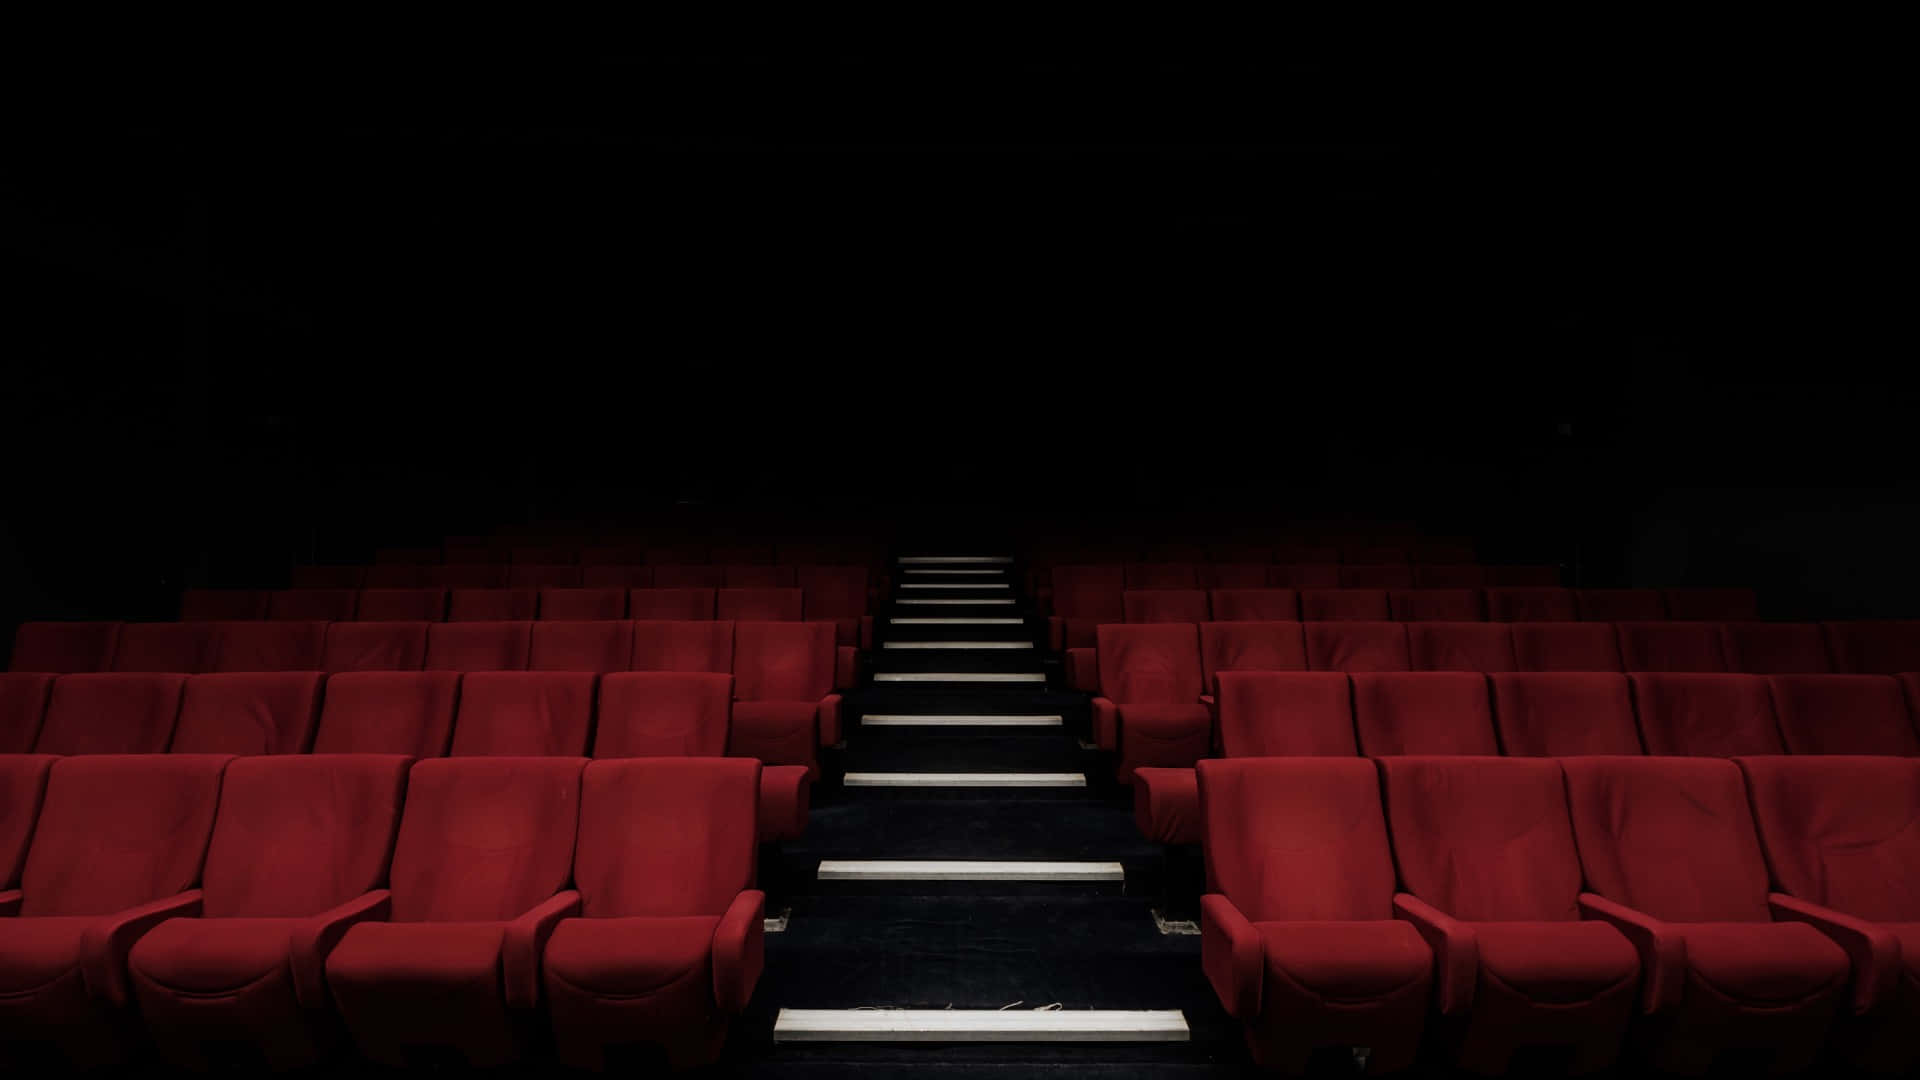 Empty Cinema Seats With A Staircase Wallpaper